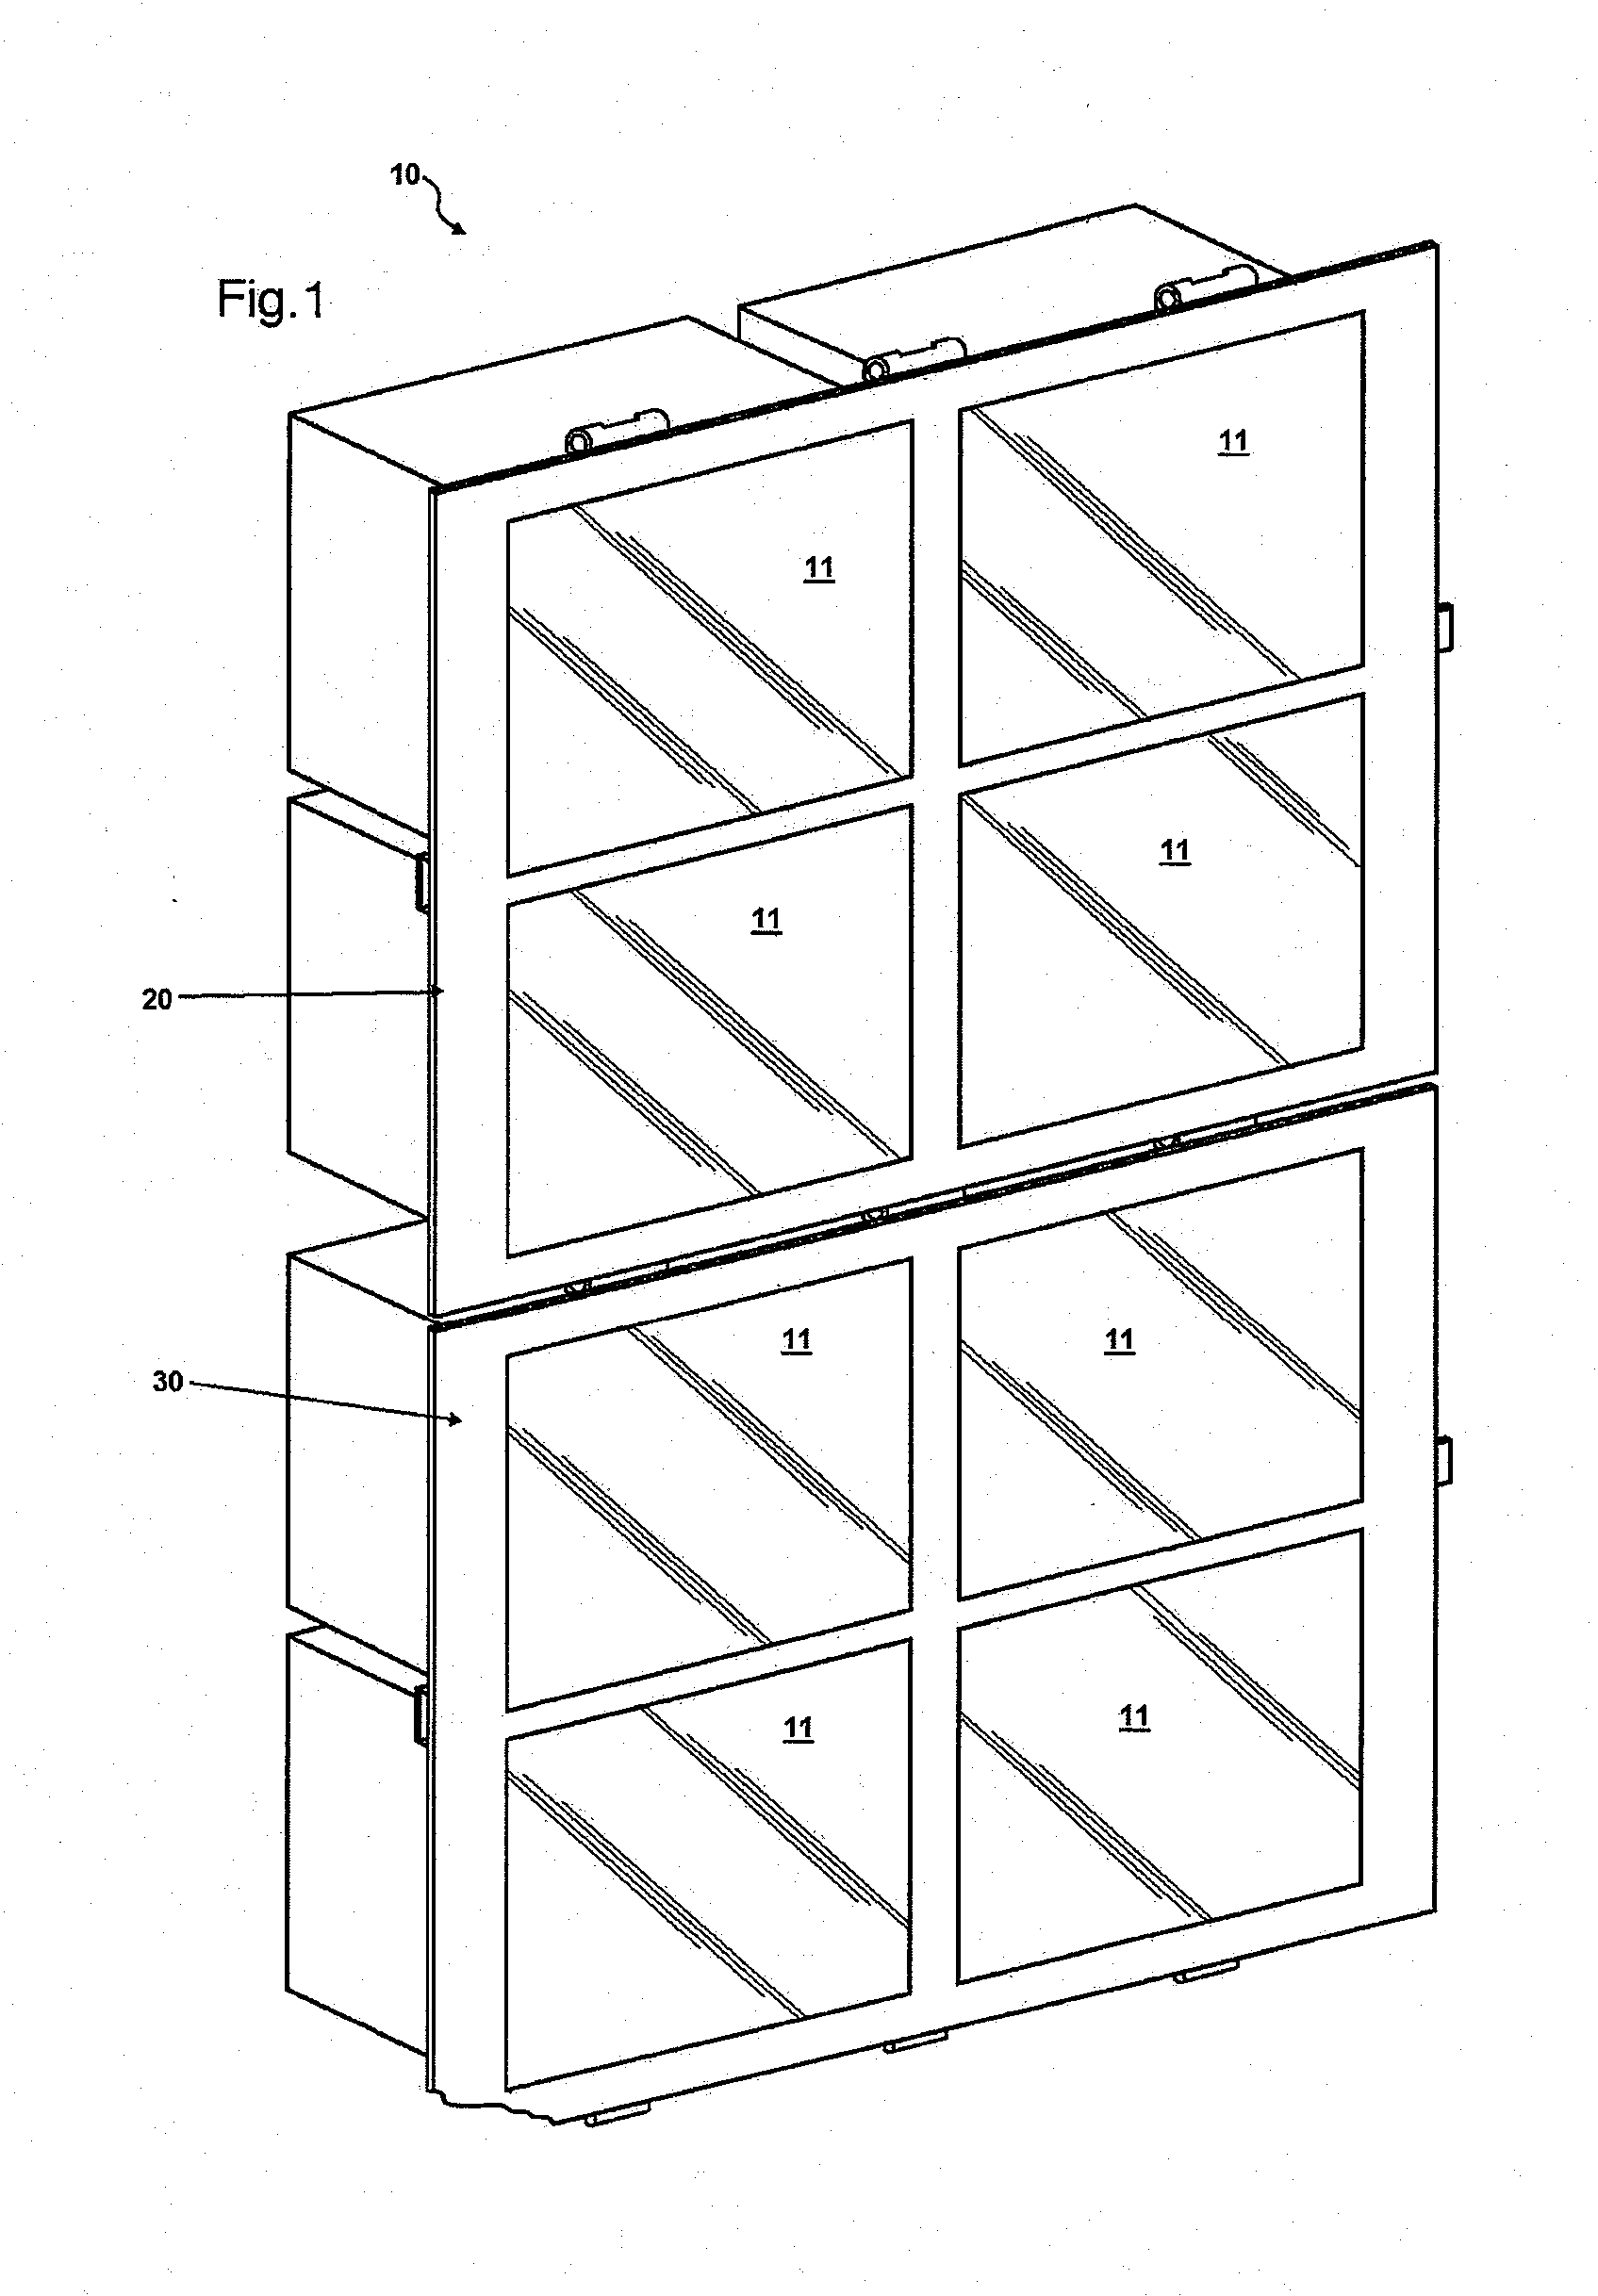 Tiled display rotational assembly